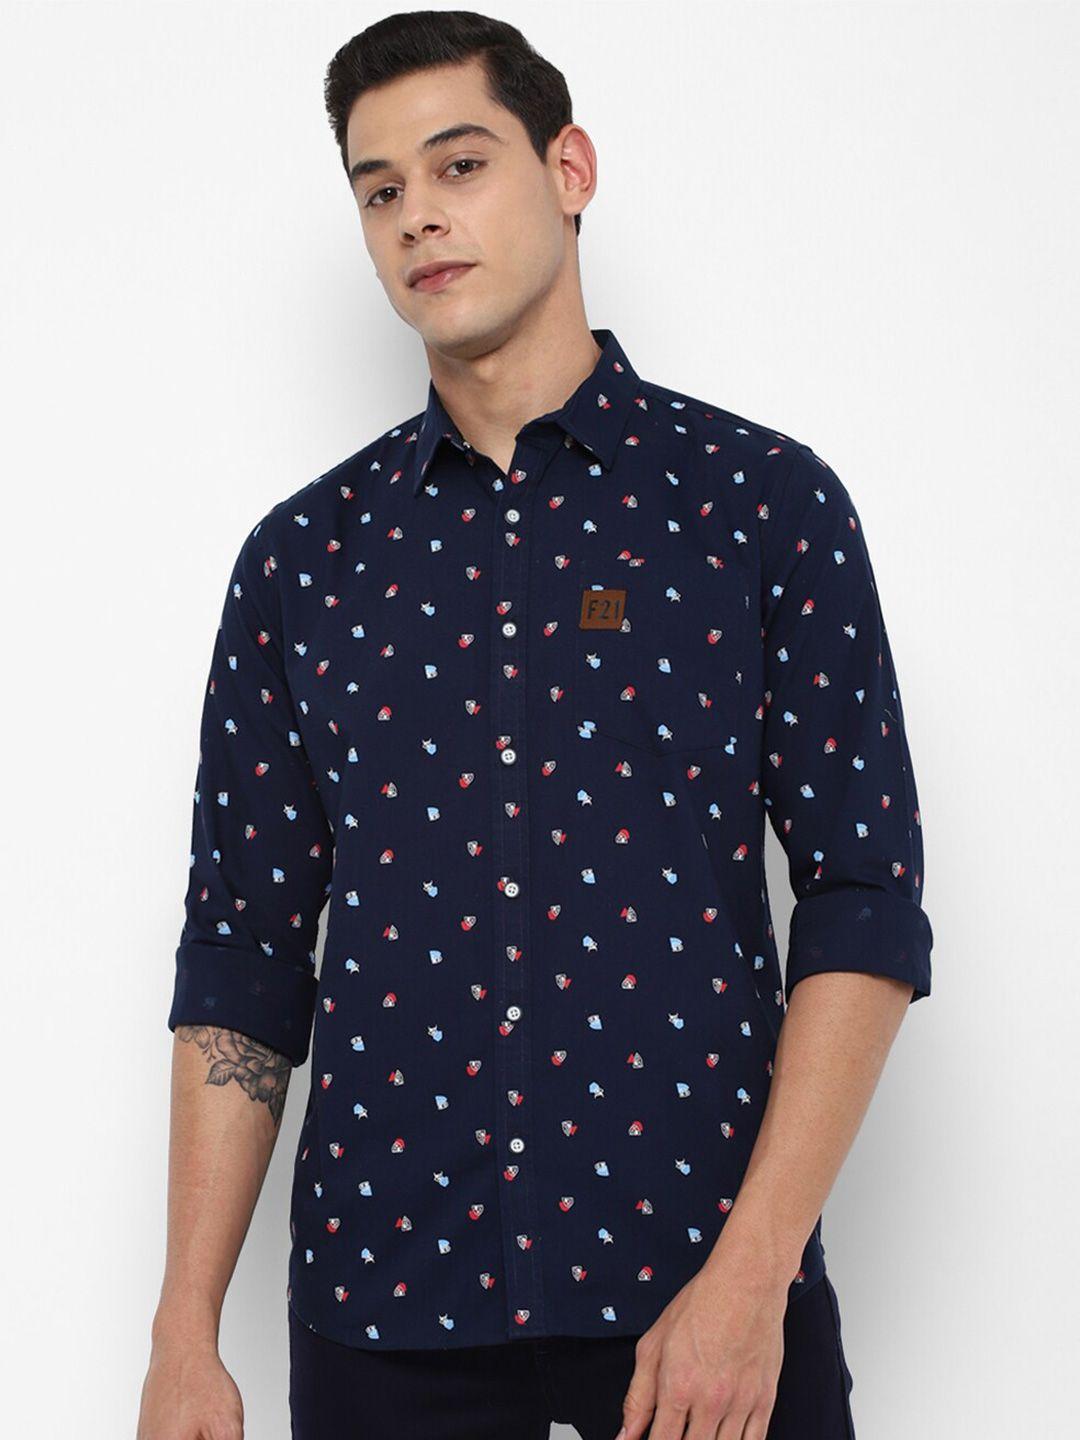 forever-21-men-blue-printed-pure-cotton-casual-shirt